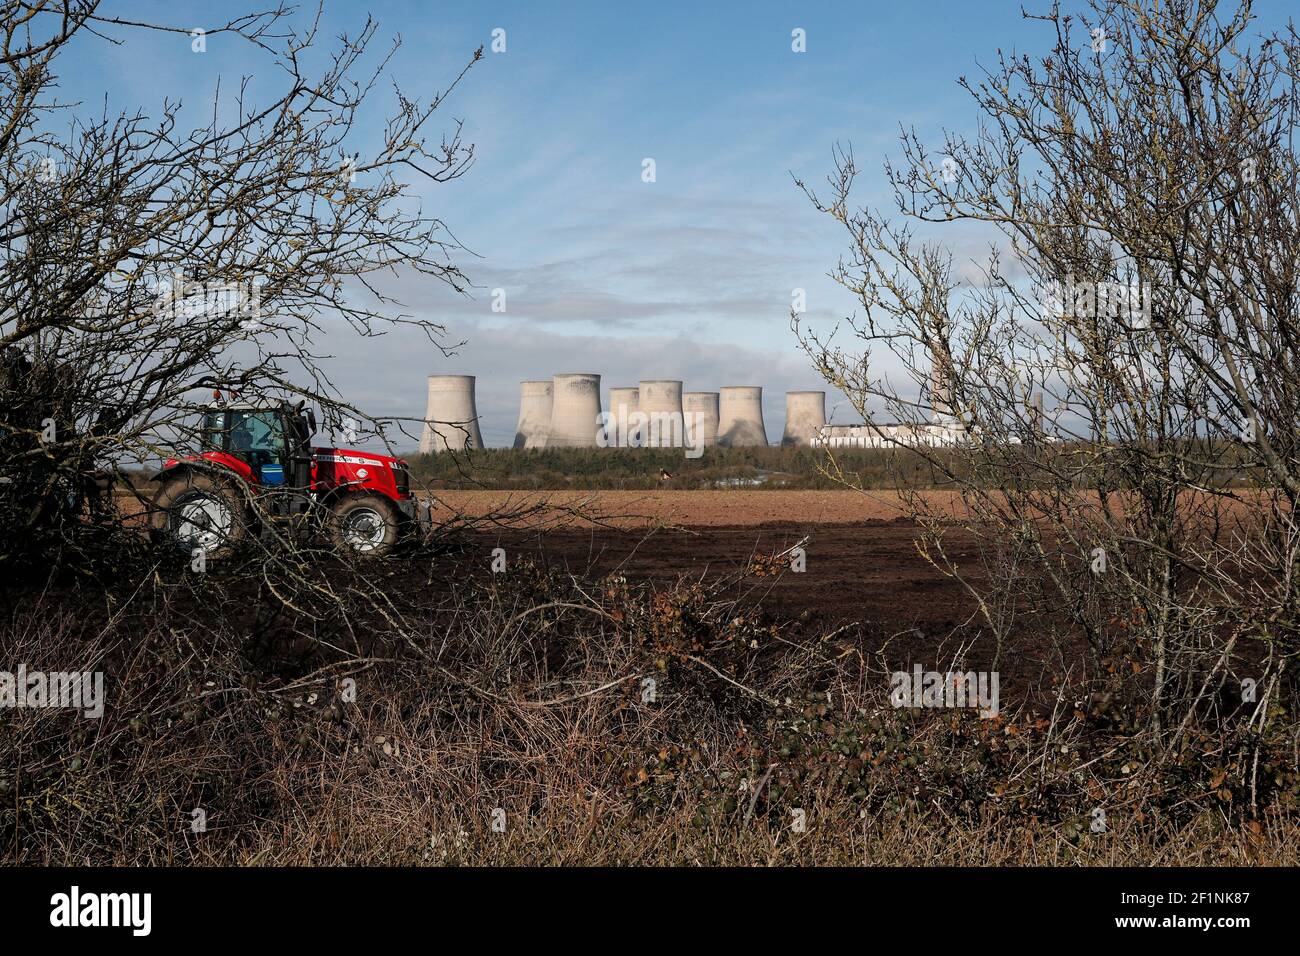 Ratcliffe-on-Soar, Nottinghamshire, UK. 9th March 2021. A farmer works near Ratcliffe-on-Soar Power Station as Rushcliffe Borough Council is to discuss an expression of interest for UniperÕs coal-powered Power Station site to accommodate a nuclear fusion reactor when it is decommissioned in 2025. Credit Darren Staples/Alamy Live News. Stock Photo